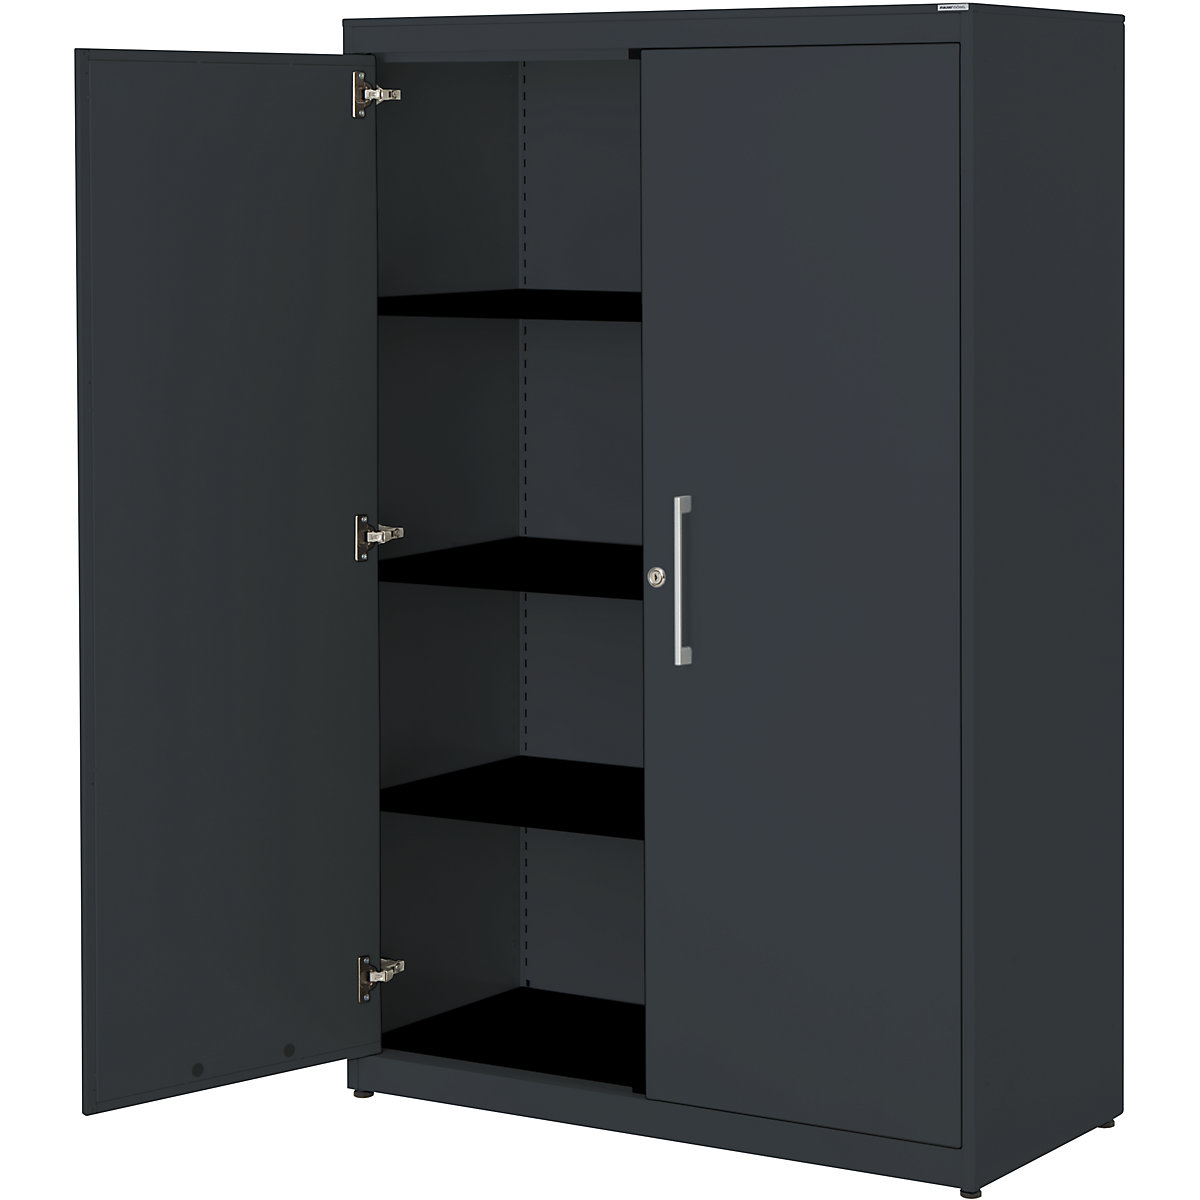 Double door cupboard – mauser, HxW 1516 x 1000 mm, steel cover plate, 3 shelves, charcoal / charcoal / charcoal-6